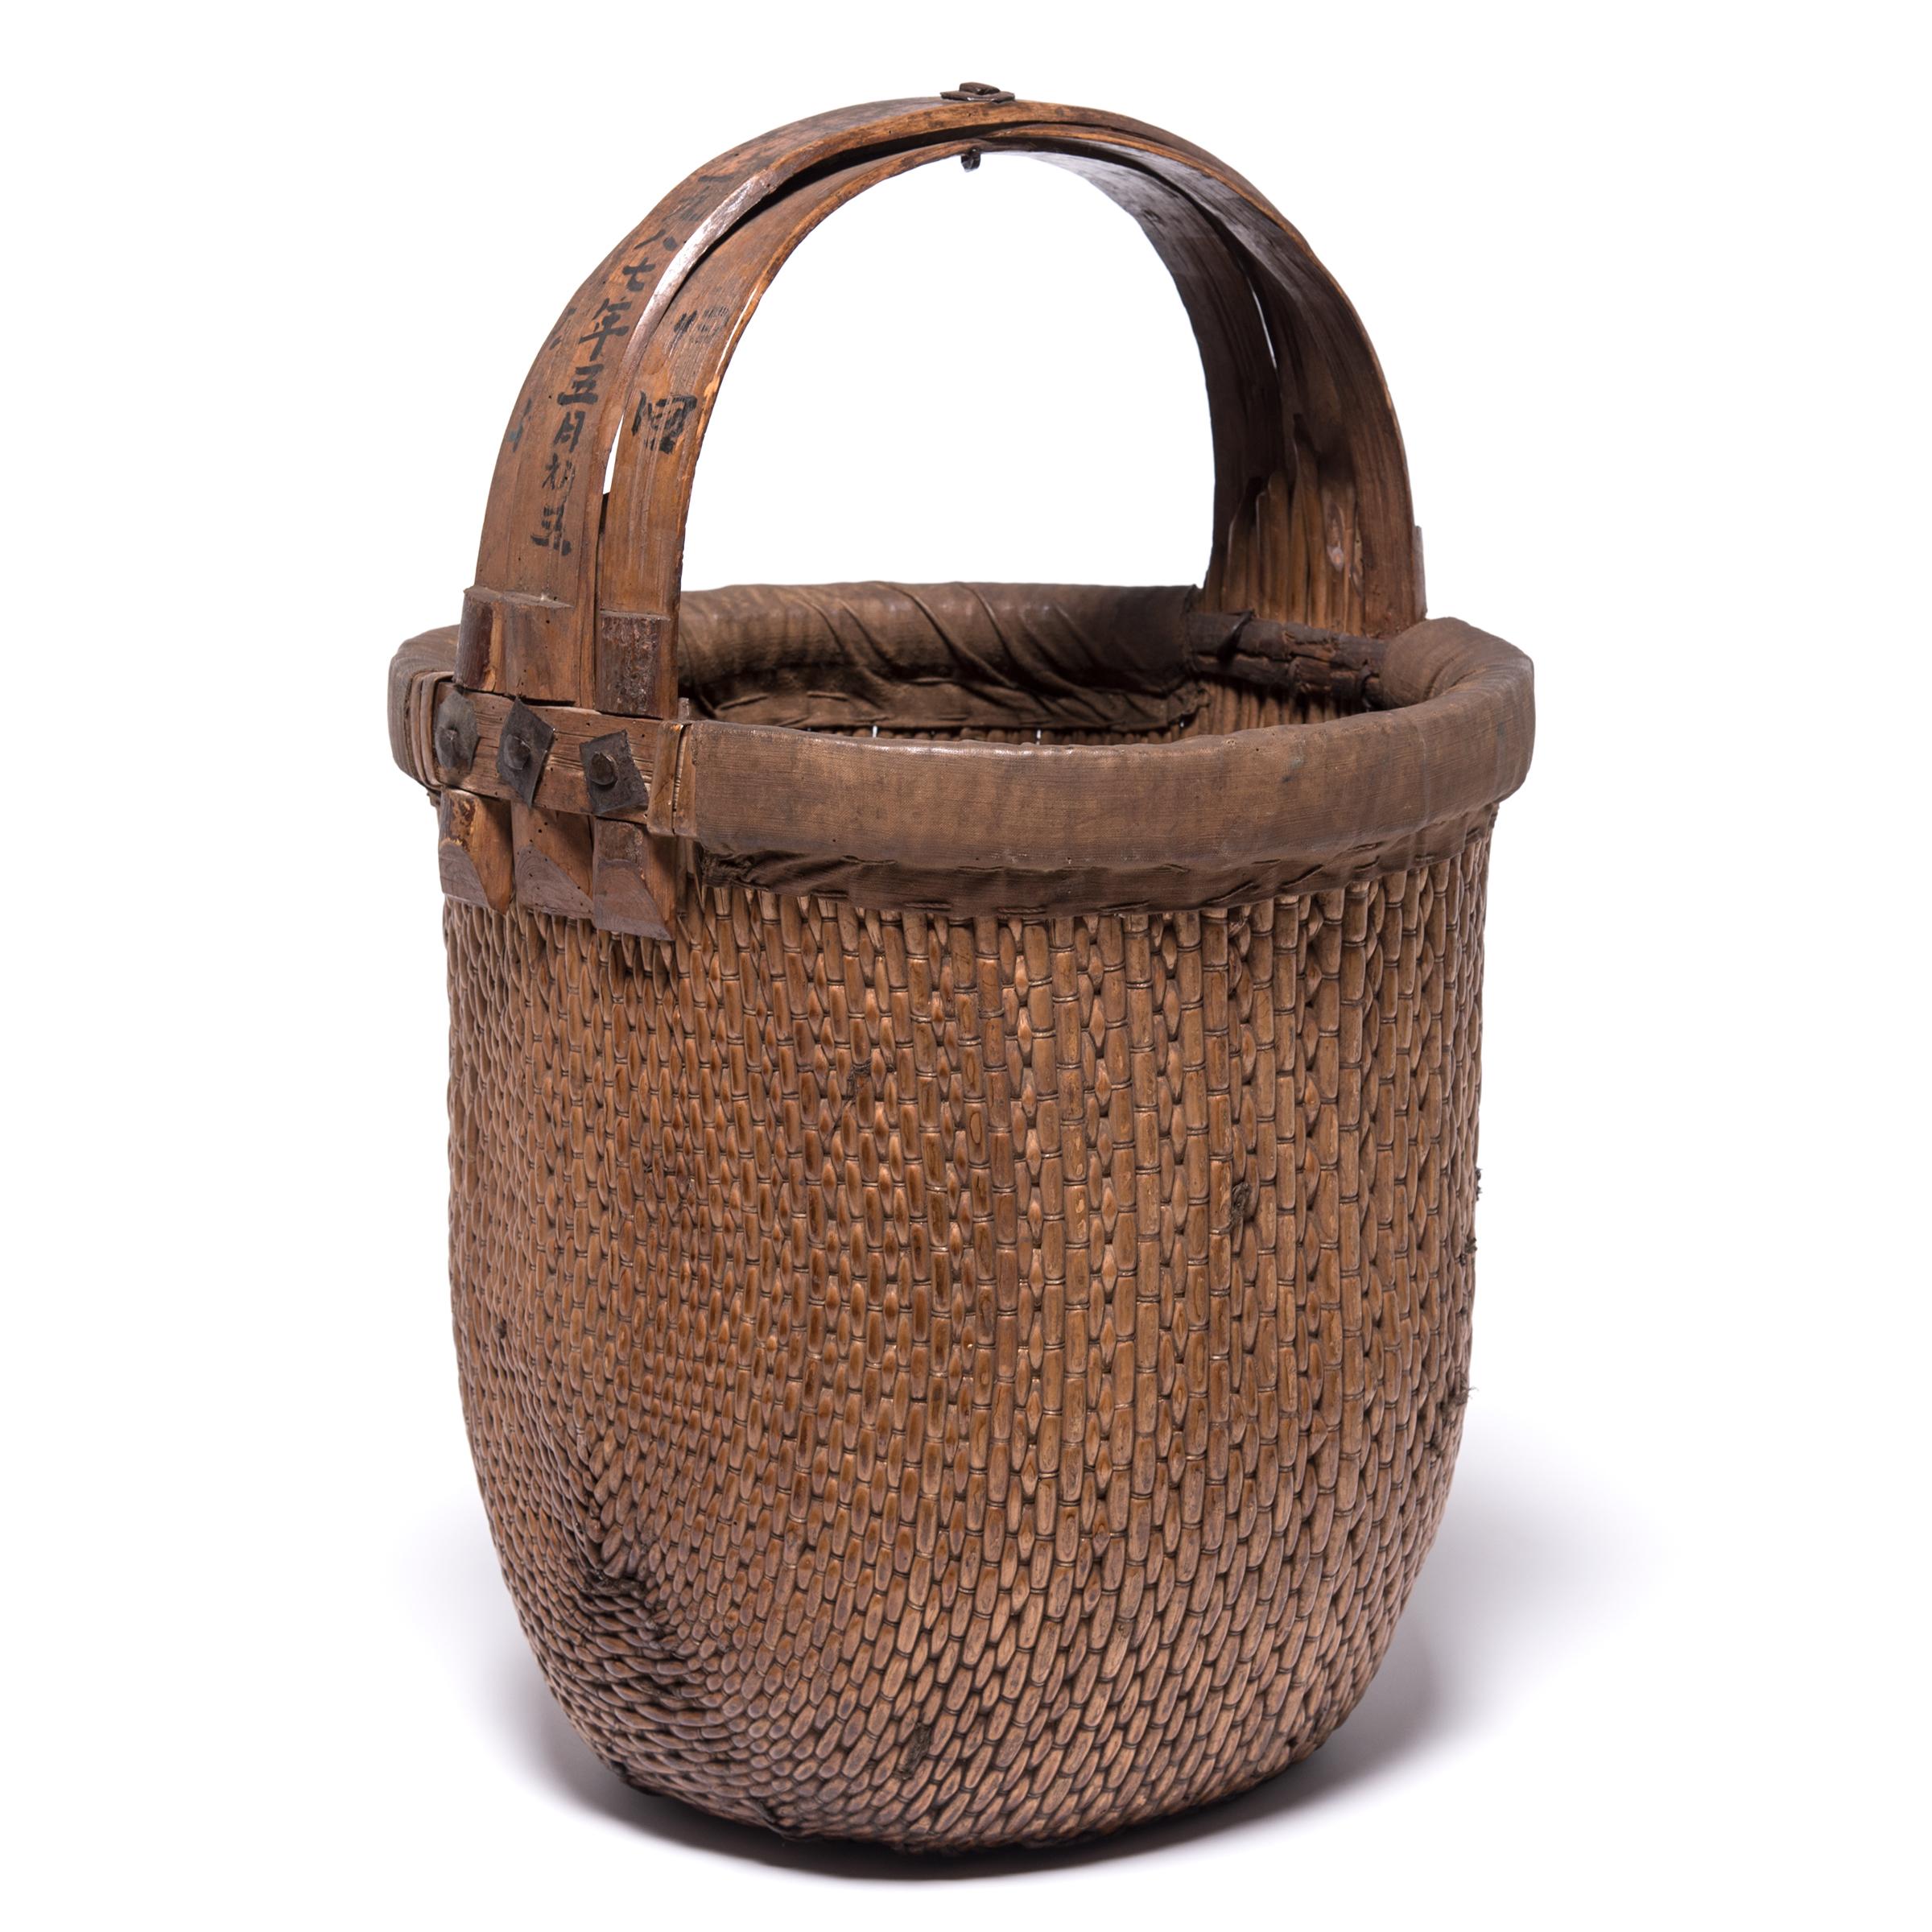 Basket making is an ancient and humble craft, but in the hands of a skilled weaver a simple willow basket can become a truly beautiful work of art. This bent handle basket was made in China long ago, and the artisan’s mastery is evident: the strong,